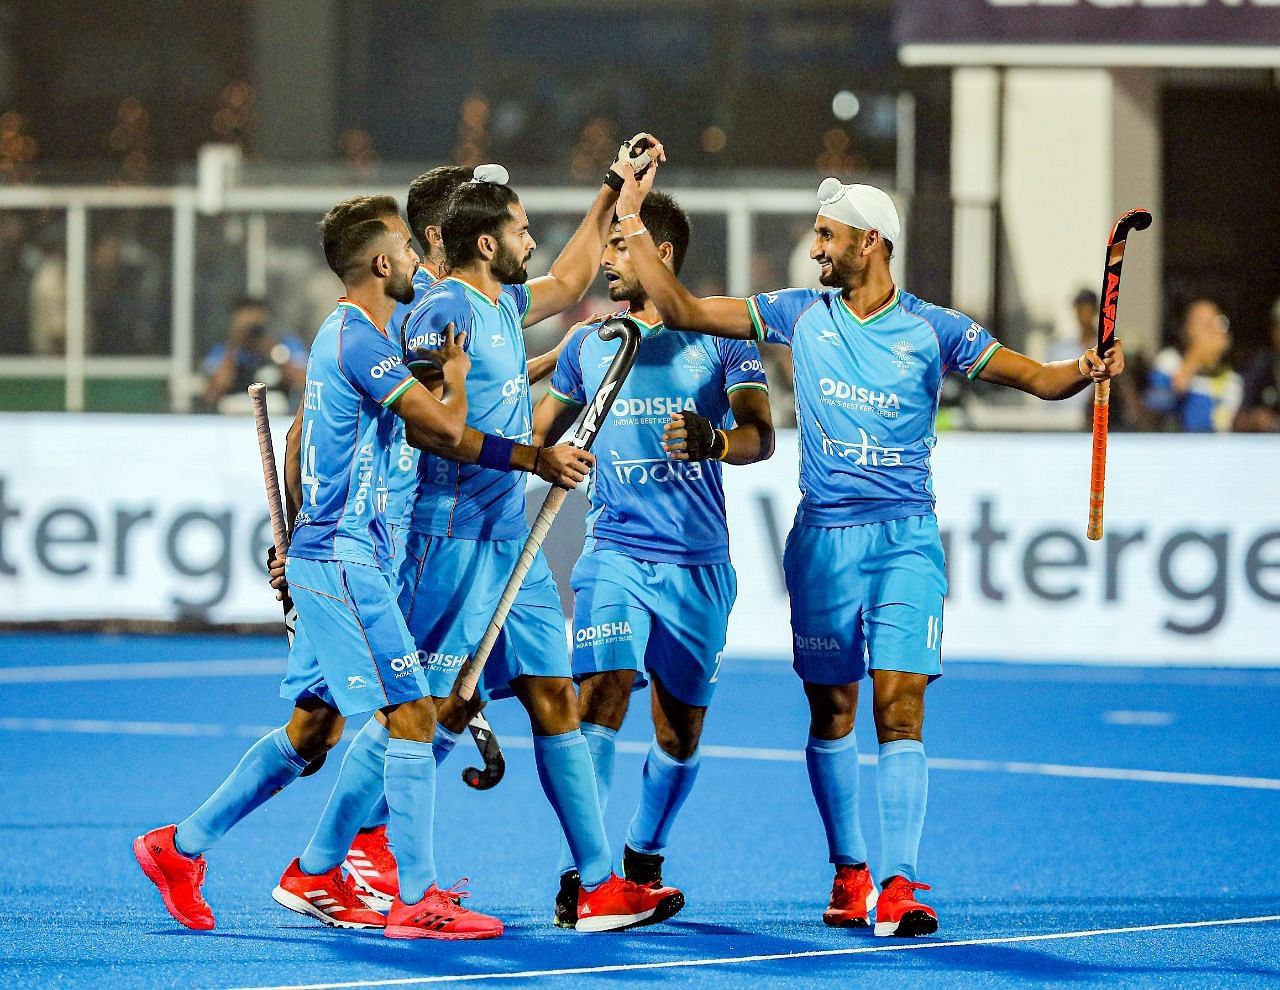 The Indians will face Belgium in the QF if they get past New Zealand on Sunday